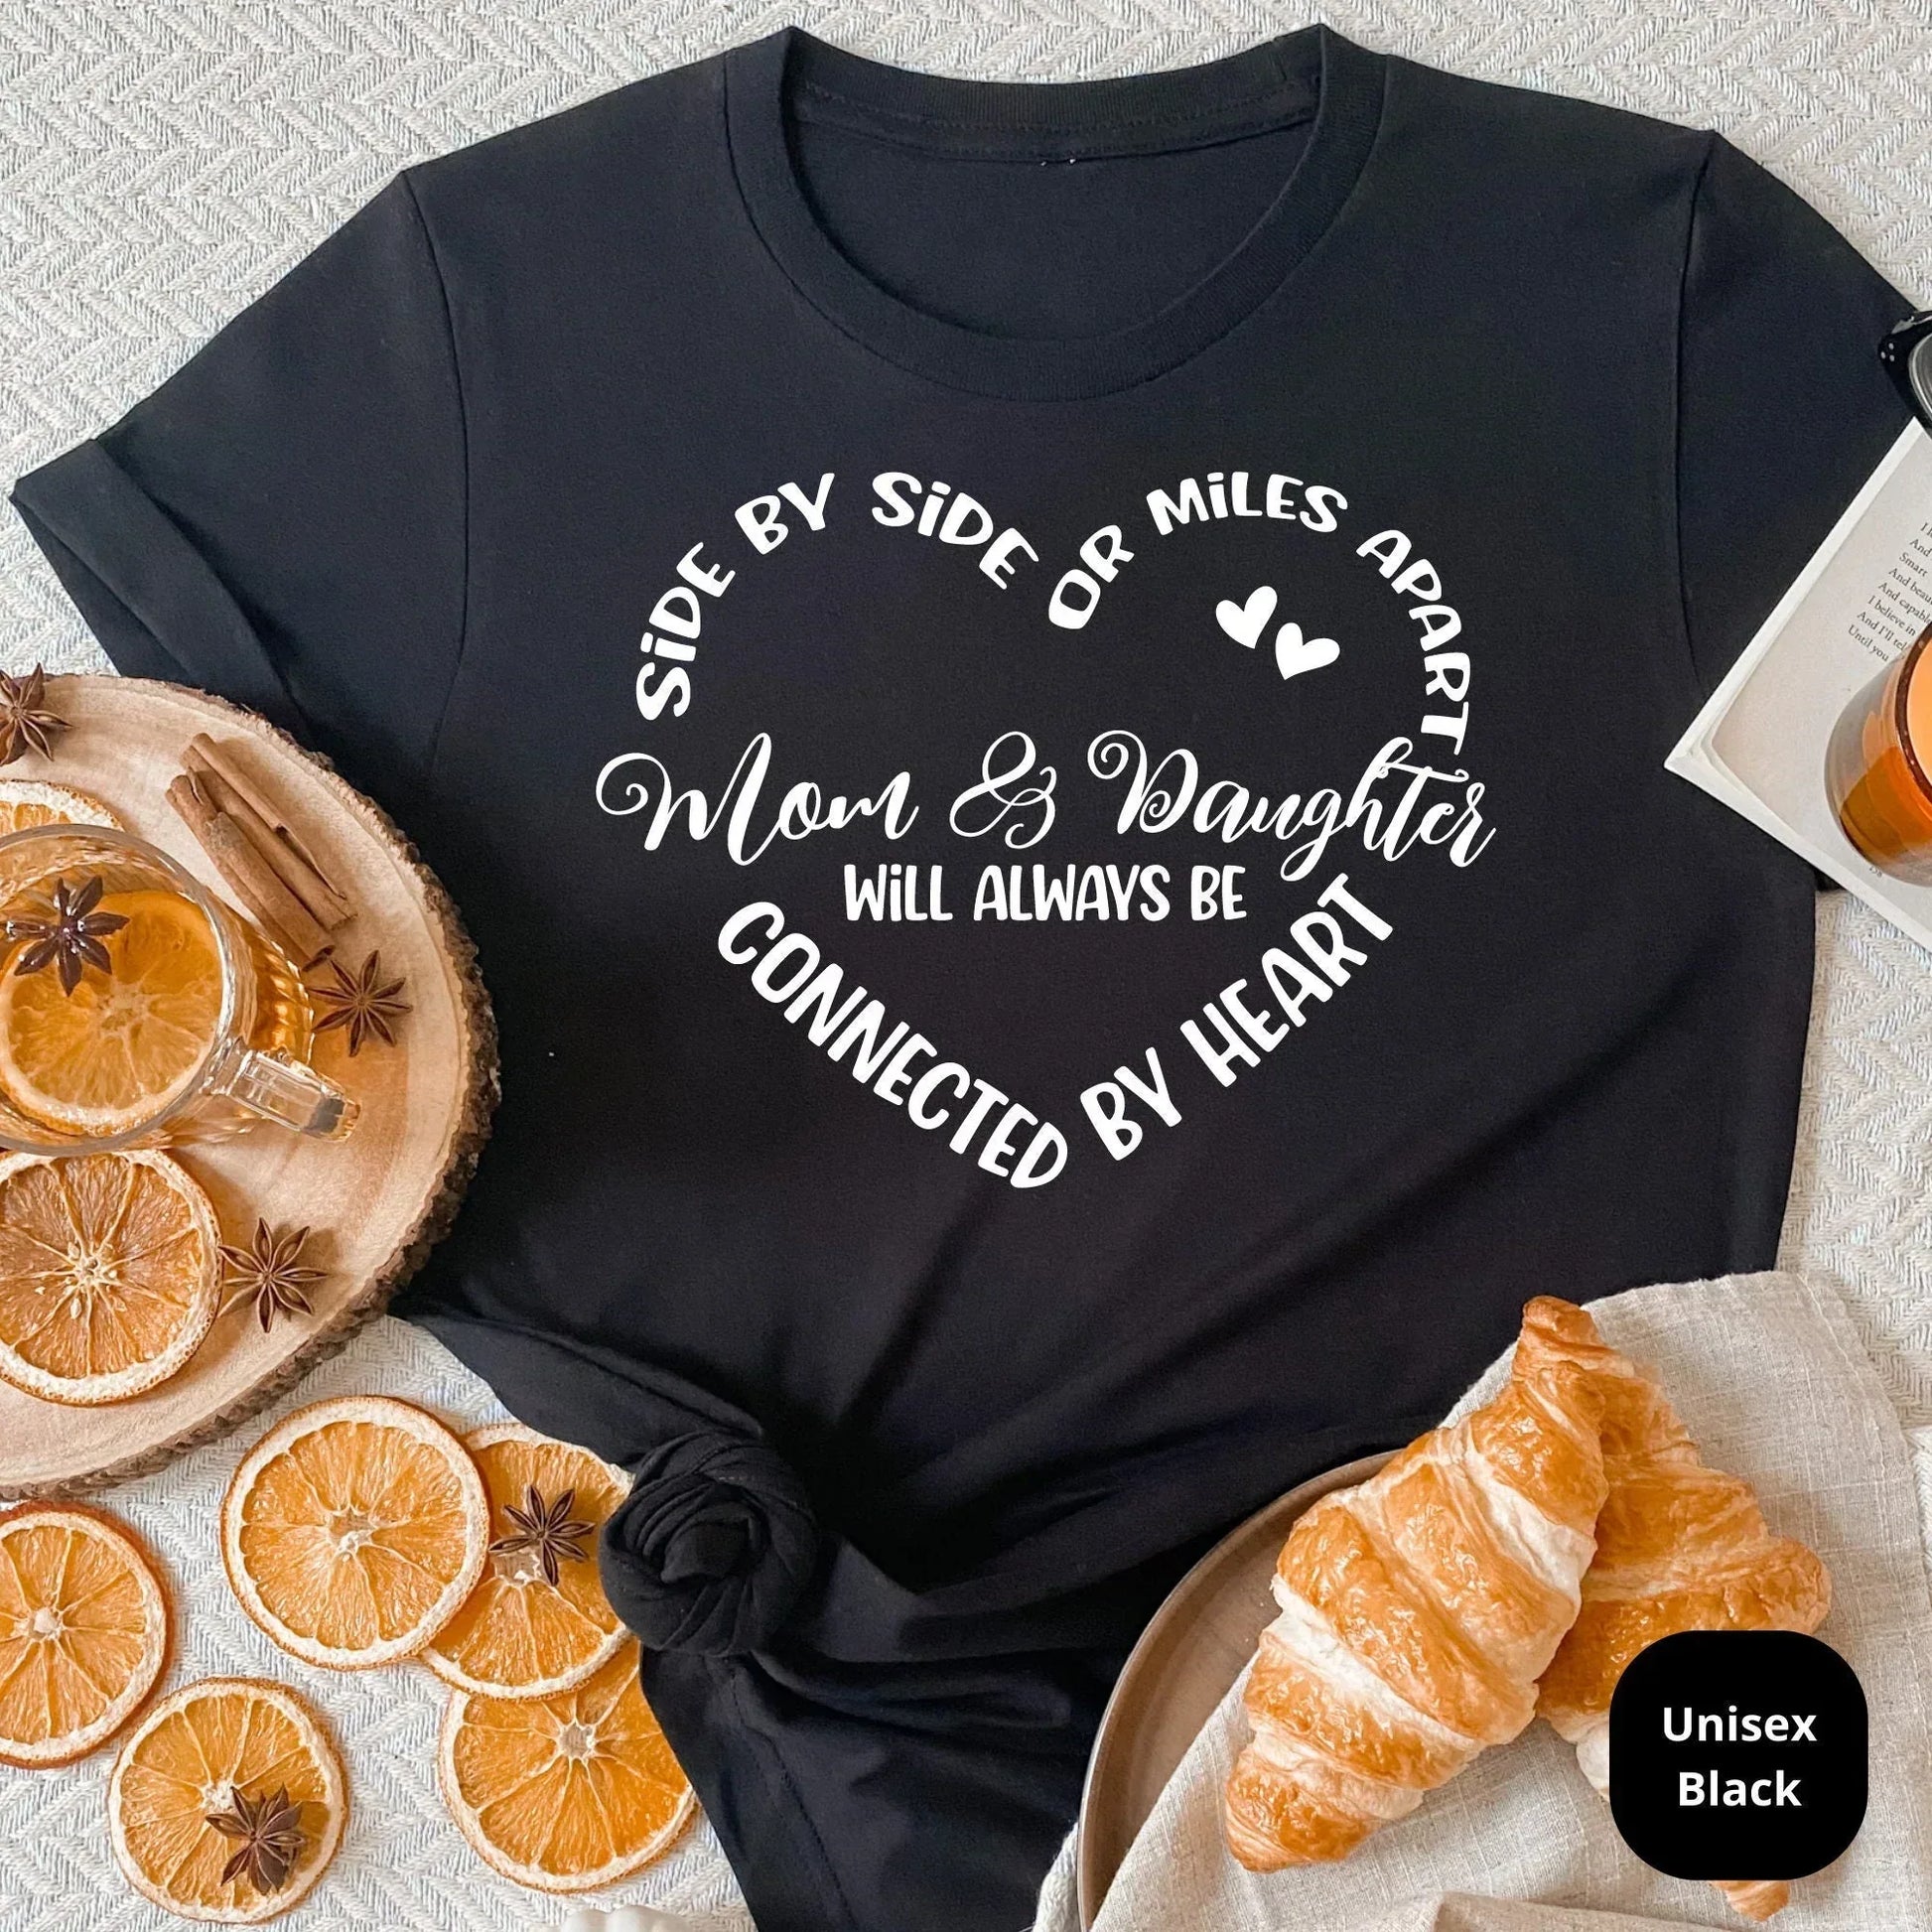 Side By Side or Miles Apart Mother and Daughter Shirts